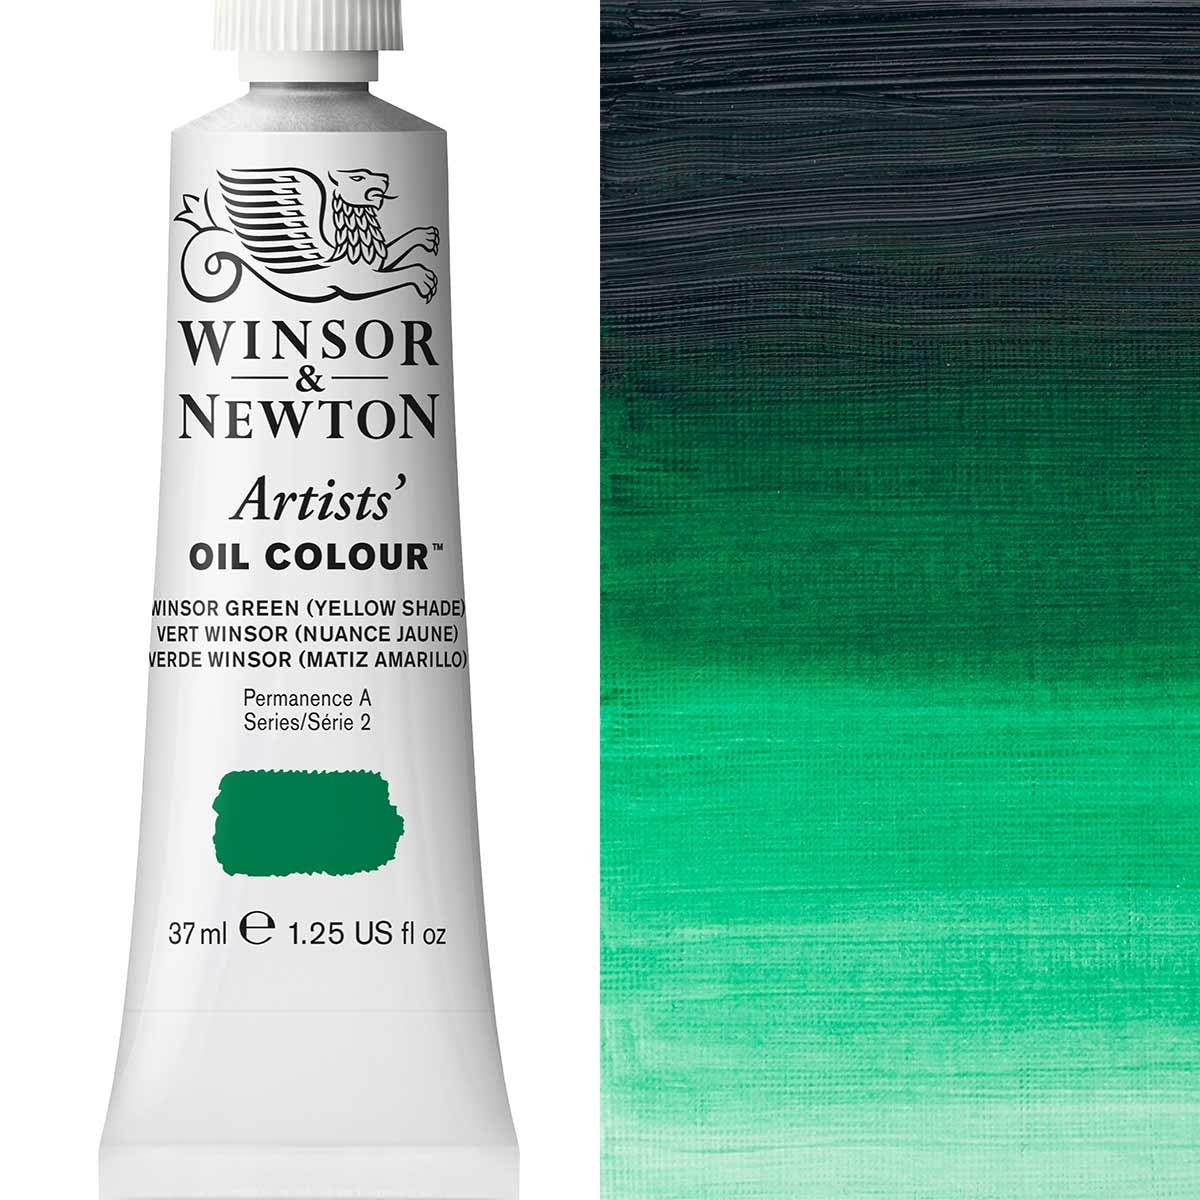 Winsor and Newton - Artists 'Oil Color - 37ml - Winsor Green Yellow Shade